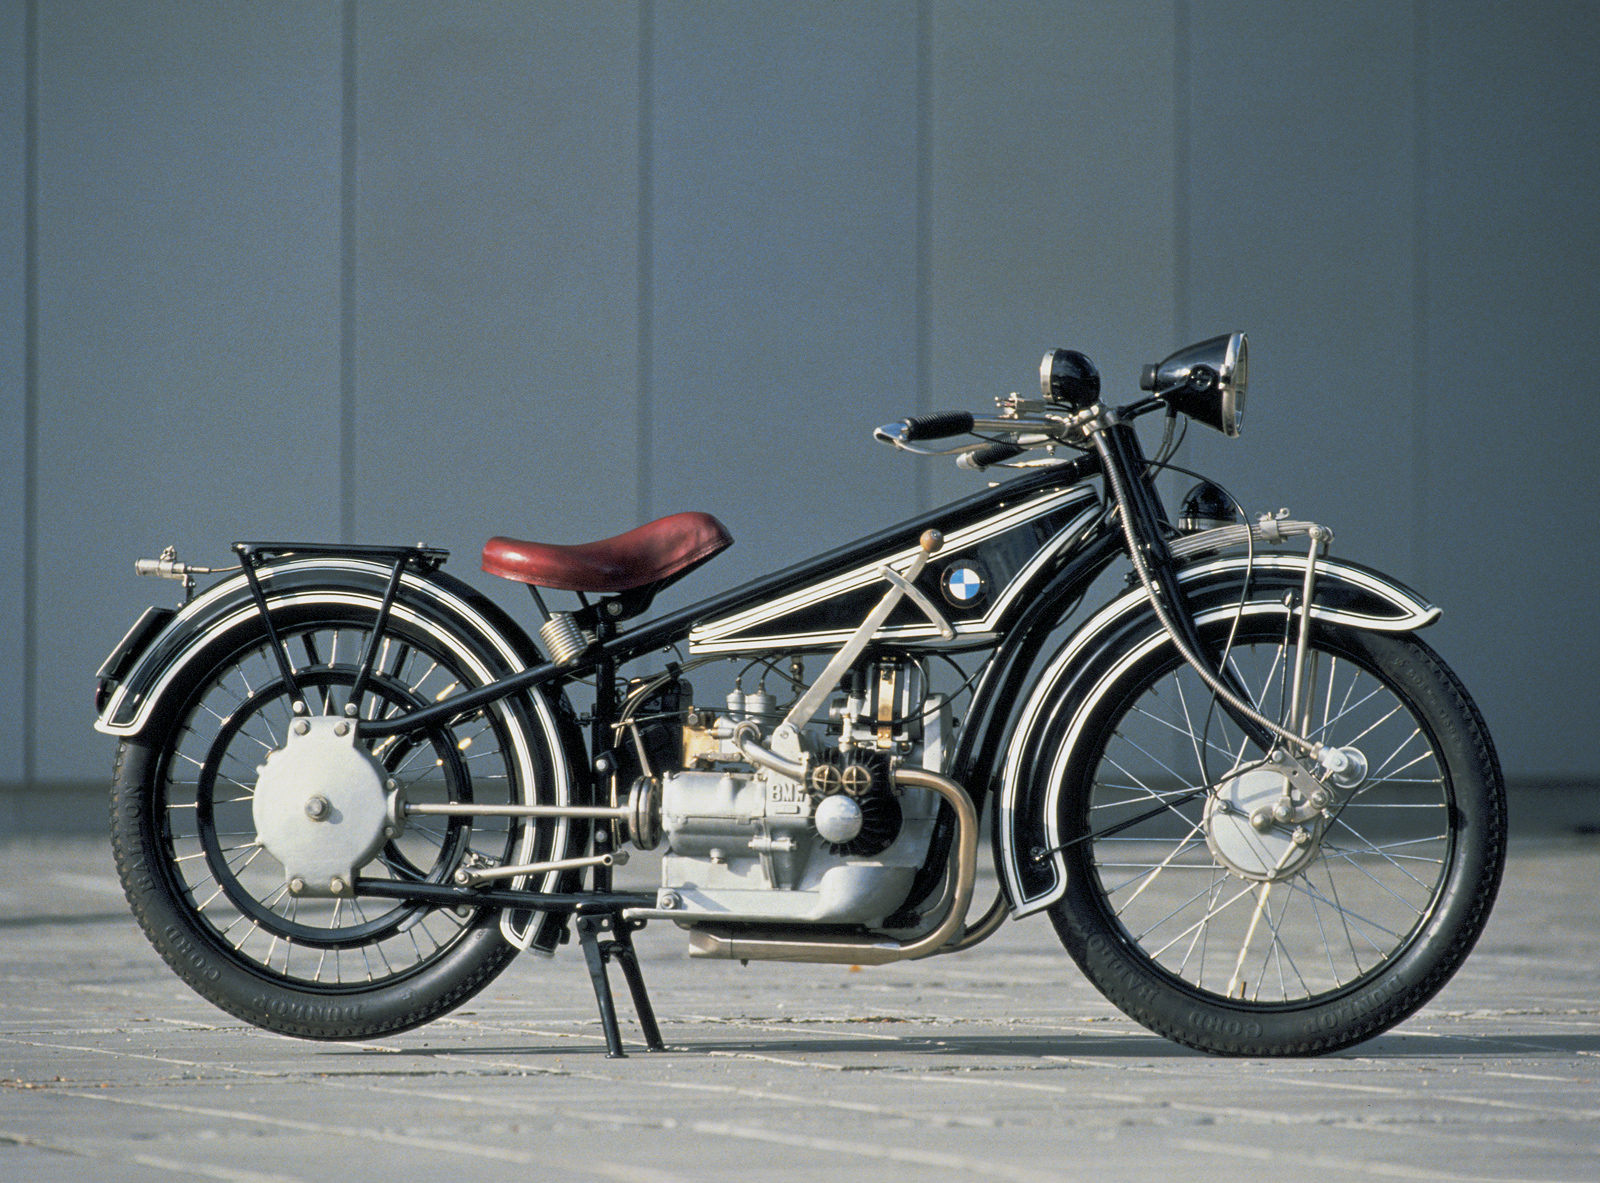 BMW R32 Classic Motorcycle, One of The Most Expensive Classic Bike in